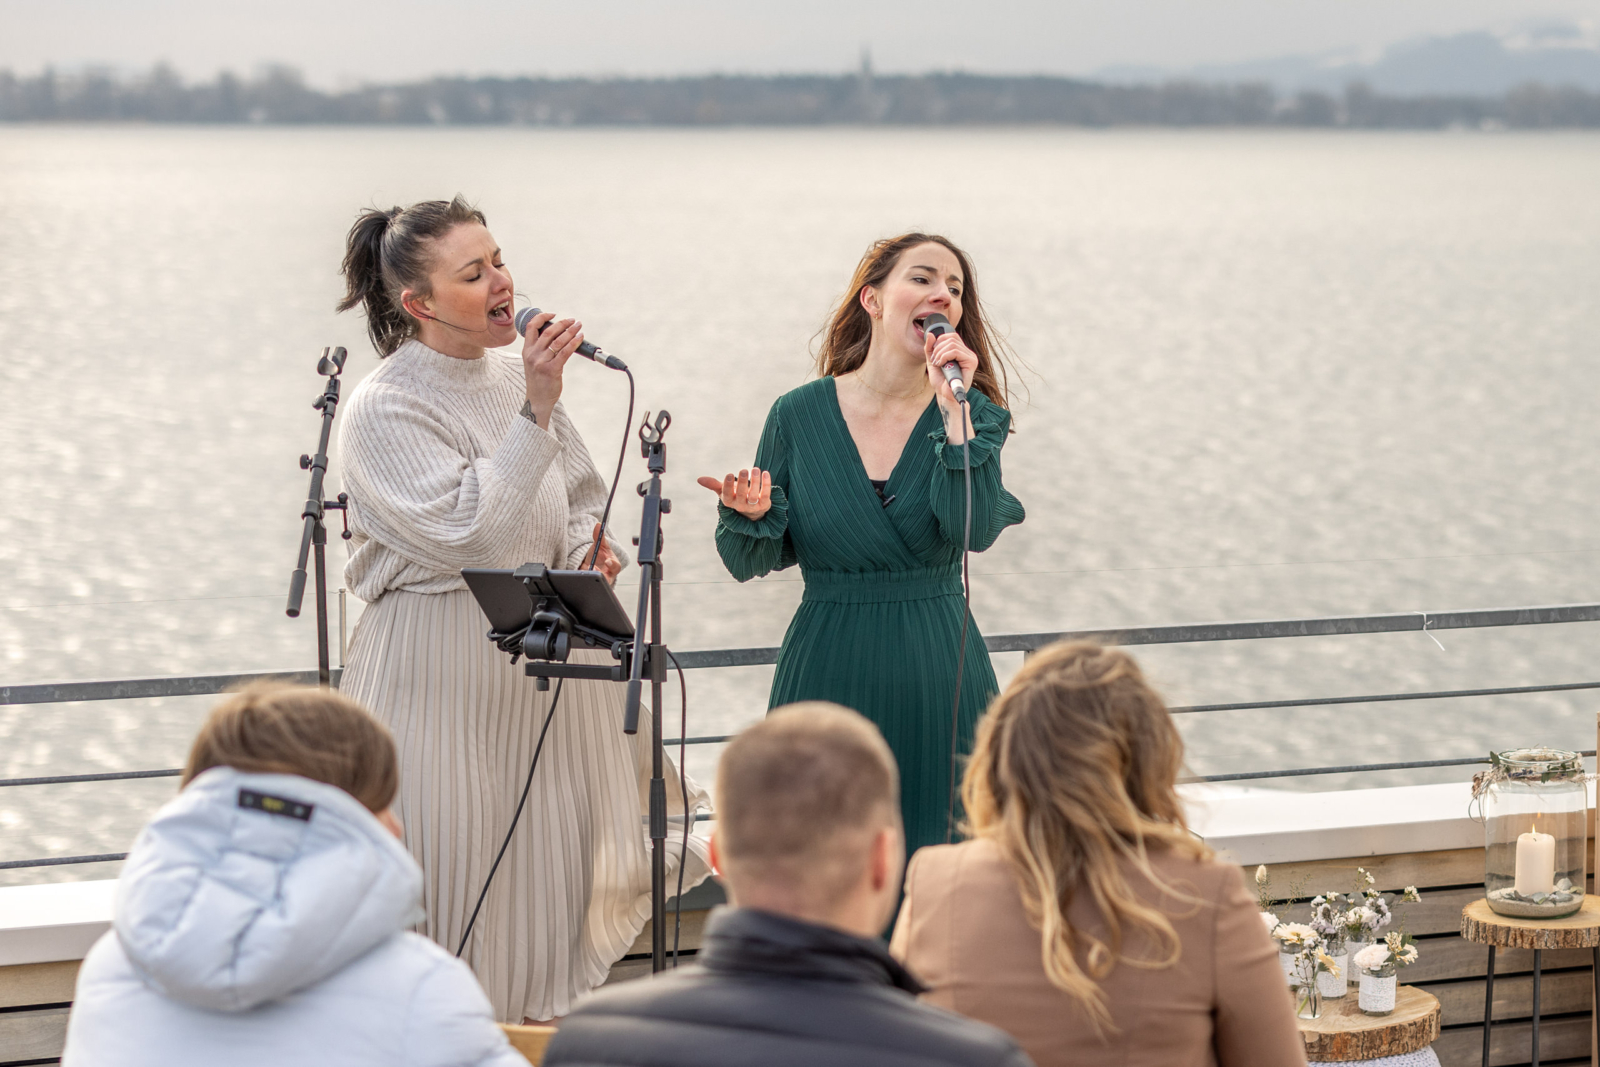 Anna-Lena and Sarah Scheier are singing at the wedding ceremony